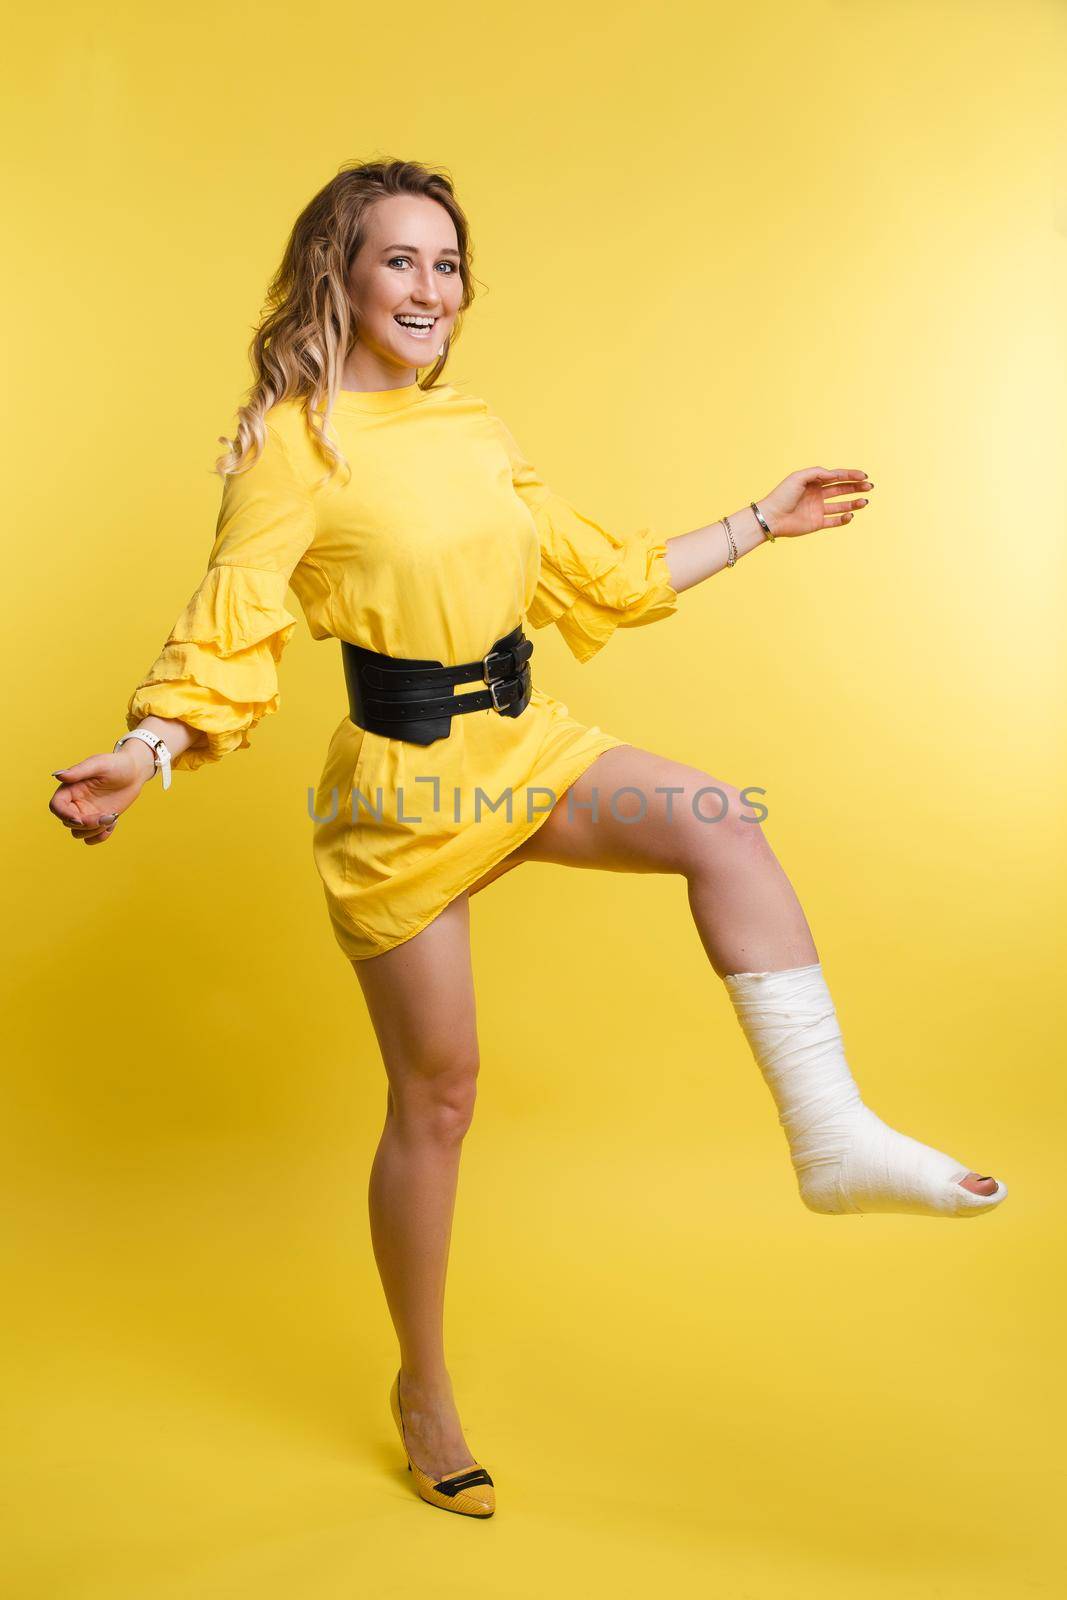 Full length portrait of stunning young woman in yellow dress with one leg in plaster. She is posing with bent broken leg in plaster showing positive attitude. Cheerful lady in dress with plaster. Isolate on red.